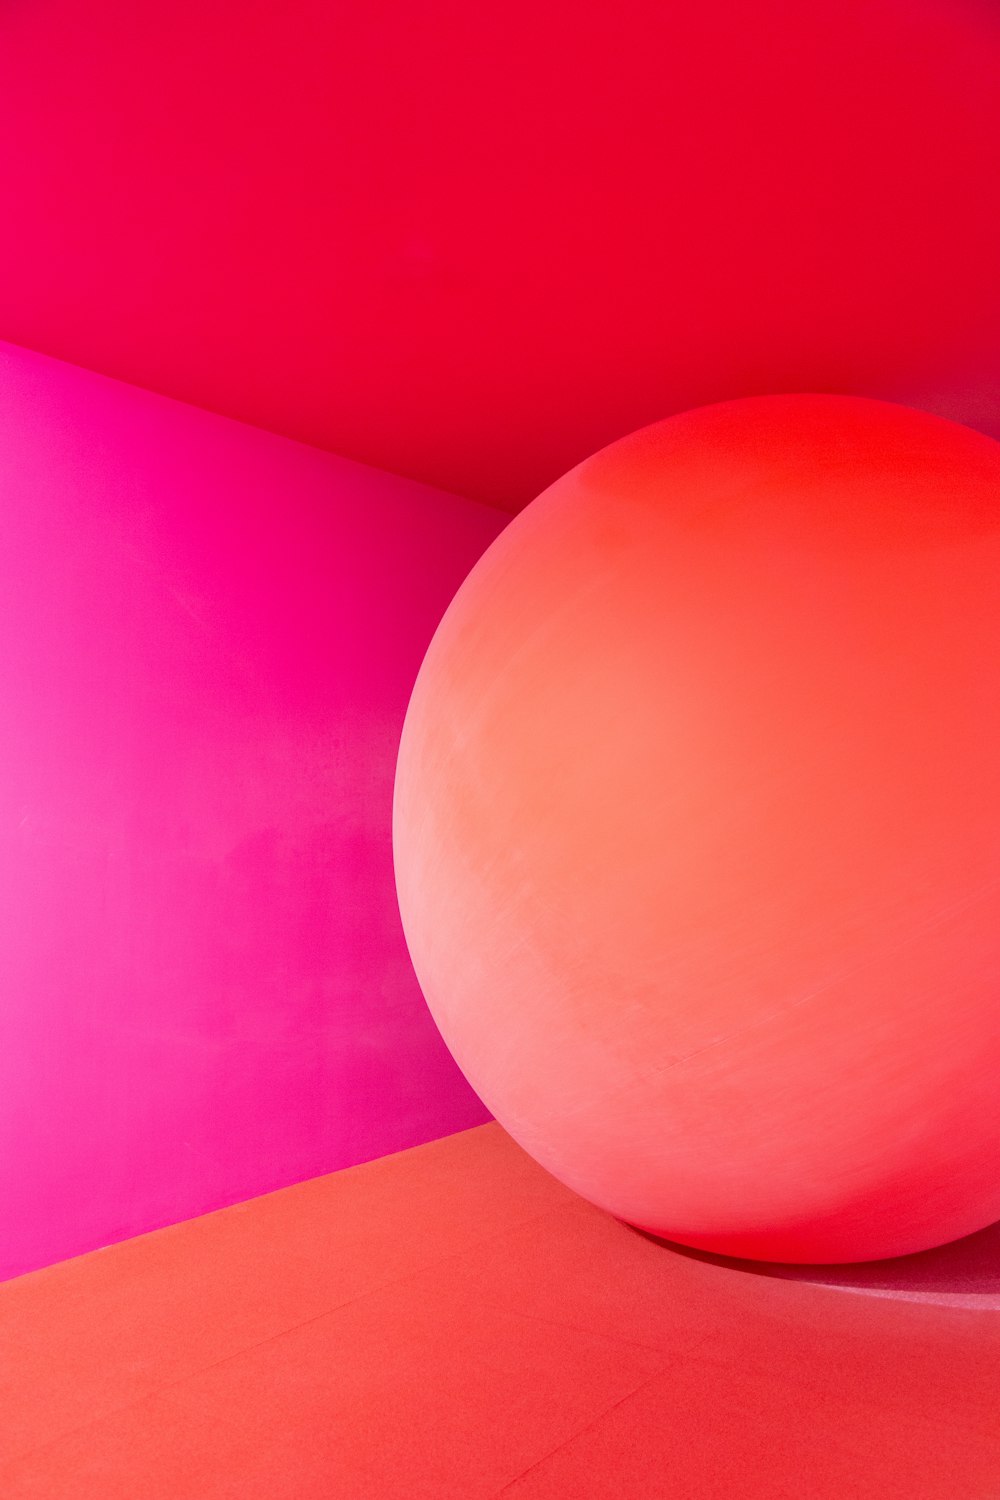 a large pink ball sitting in a room